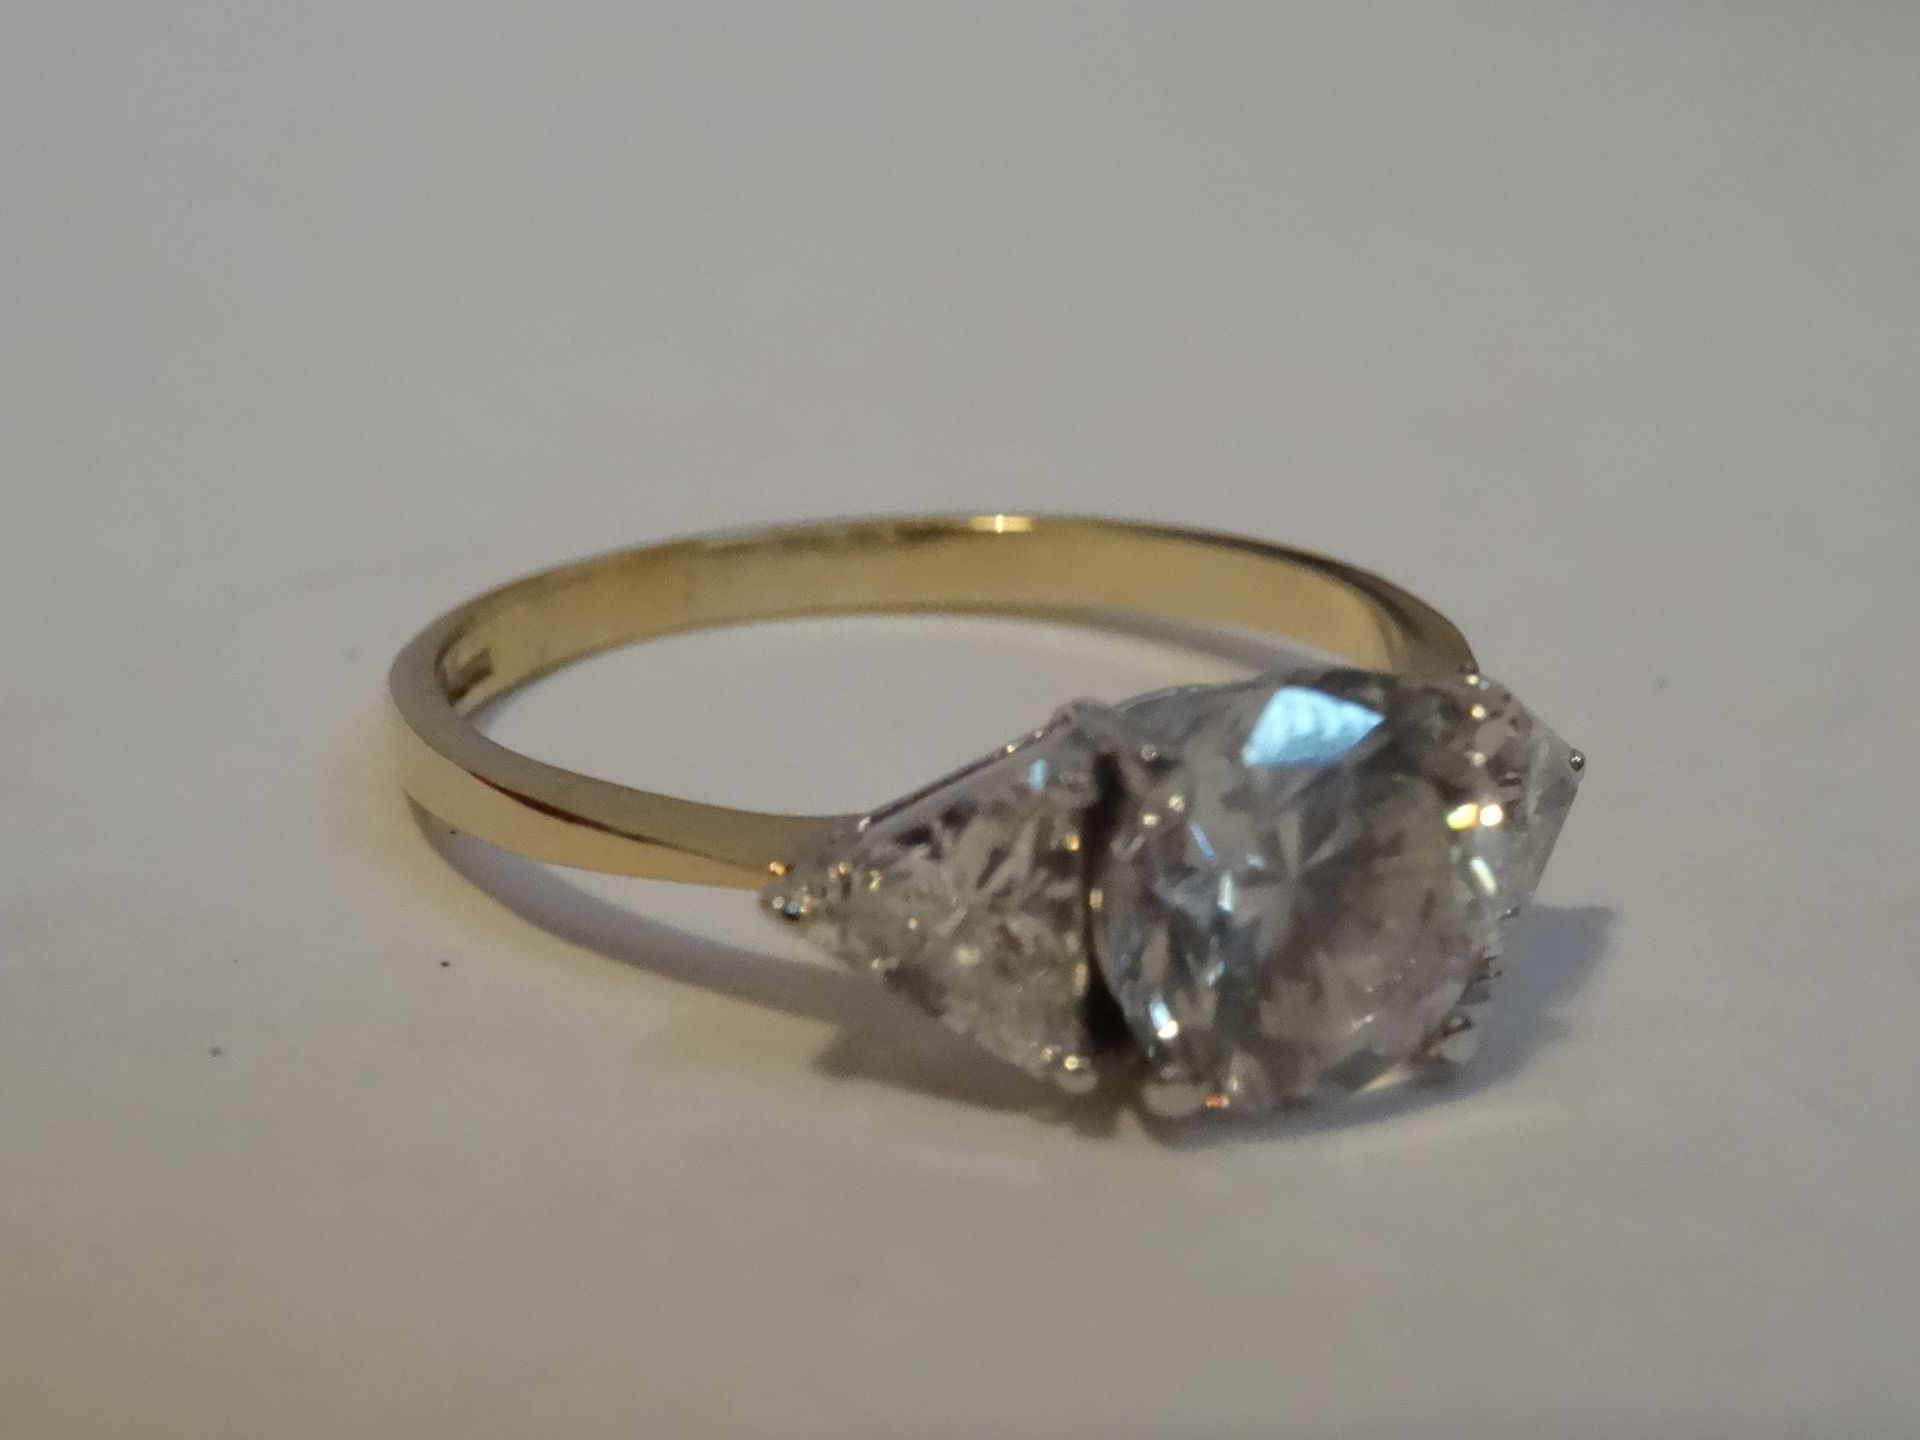 14 Carat Yellow & White Gold 3 Unchecked Stone Ring. Total Piece Weight 3.41 Grams - Image 3 of 3